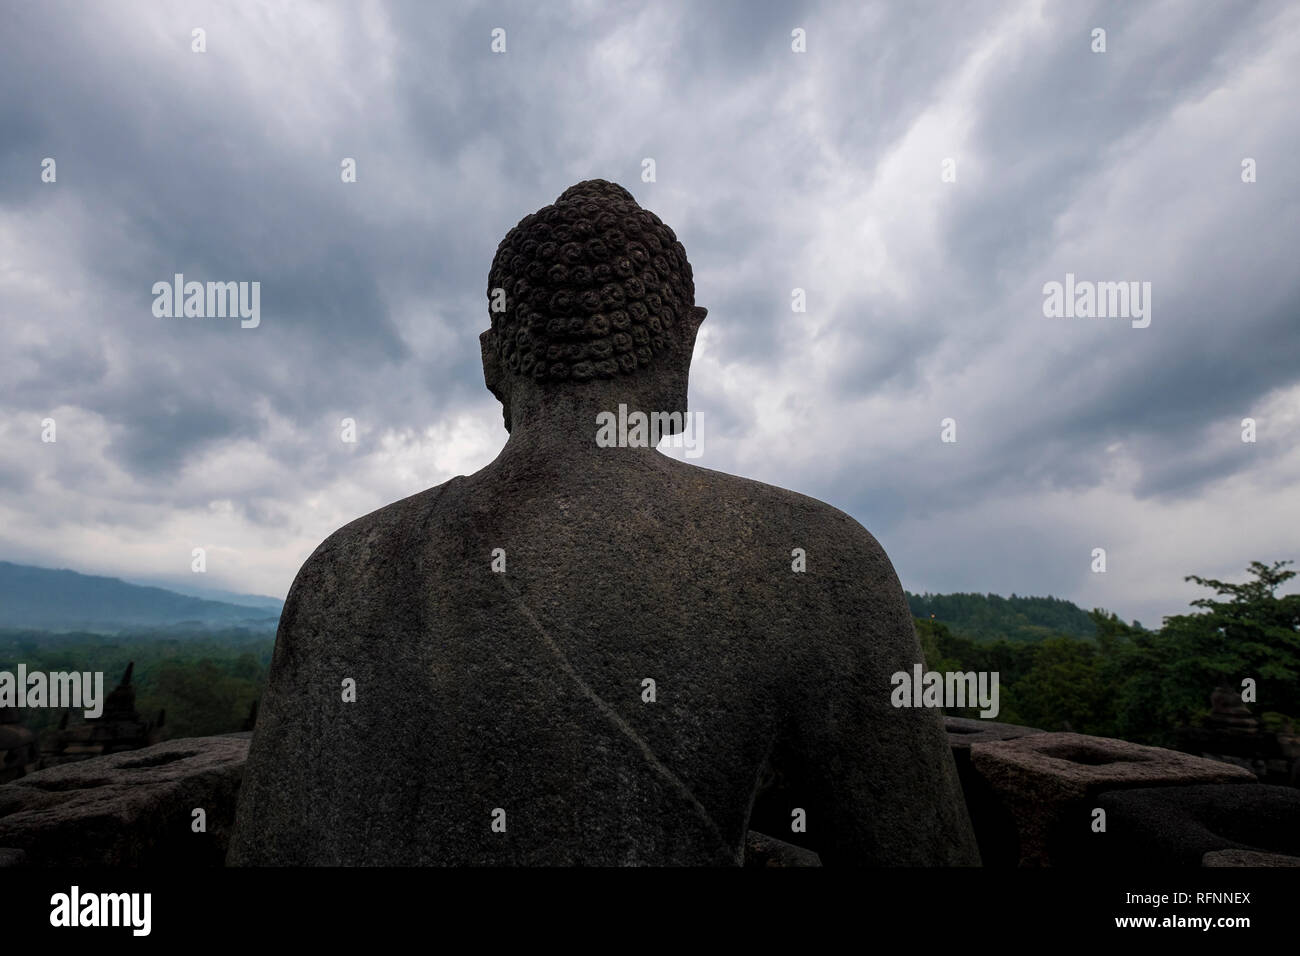 Buddha gazing out under a moody sky at Borobudur temple in Java, Indonesia. Stock Photo